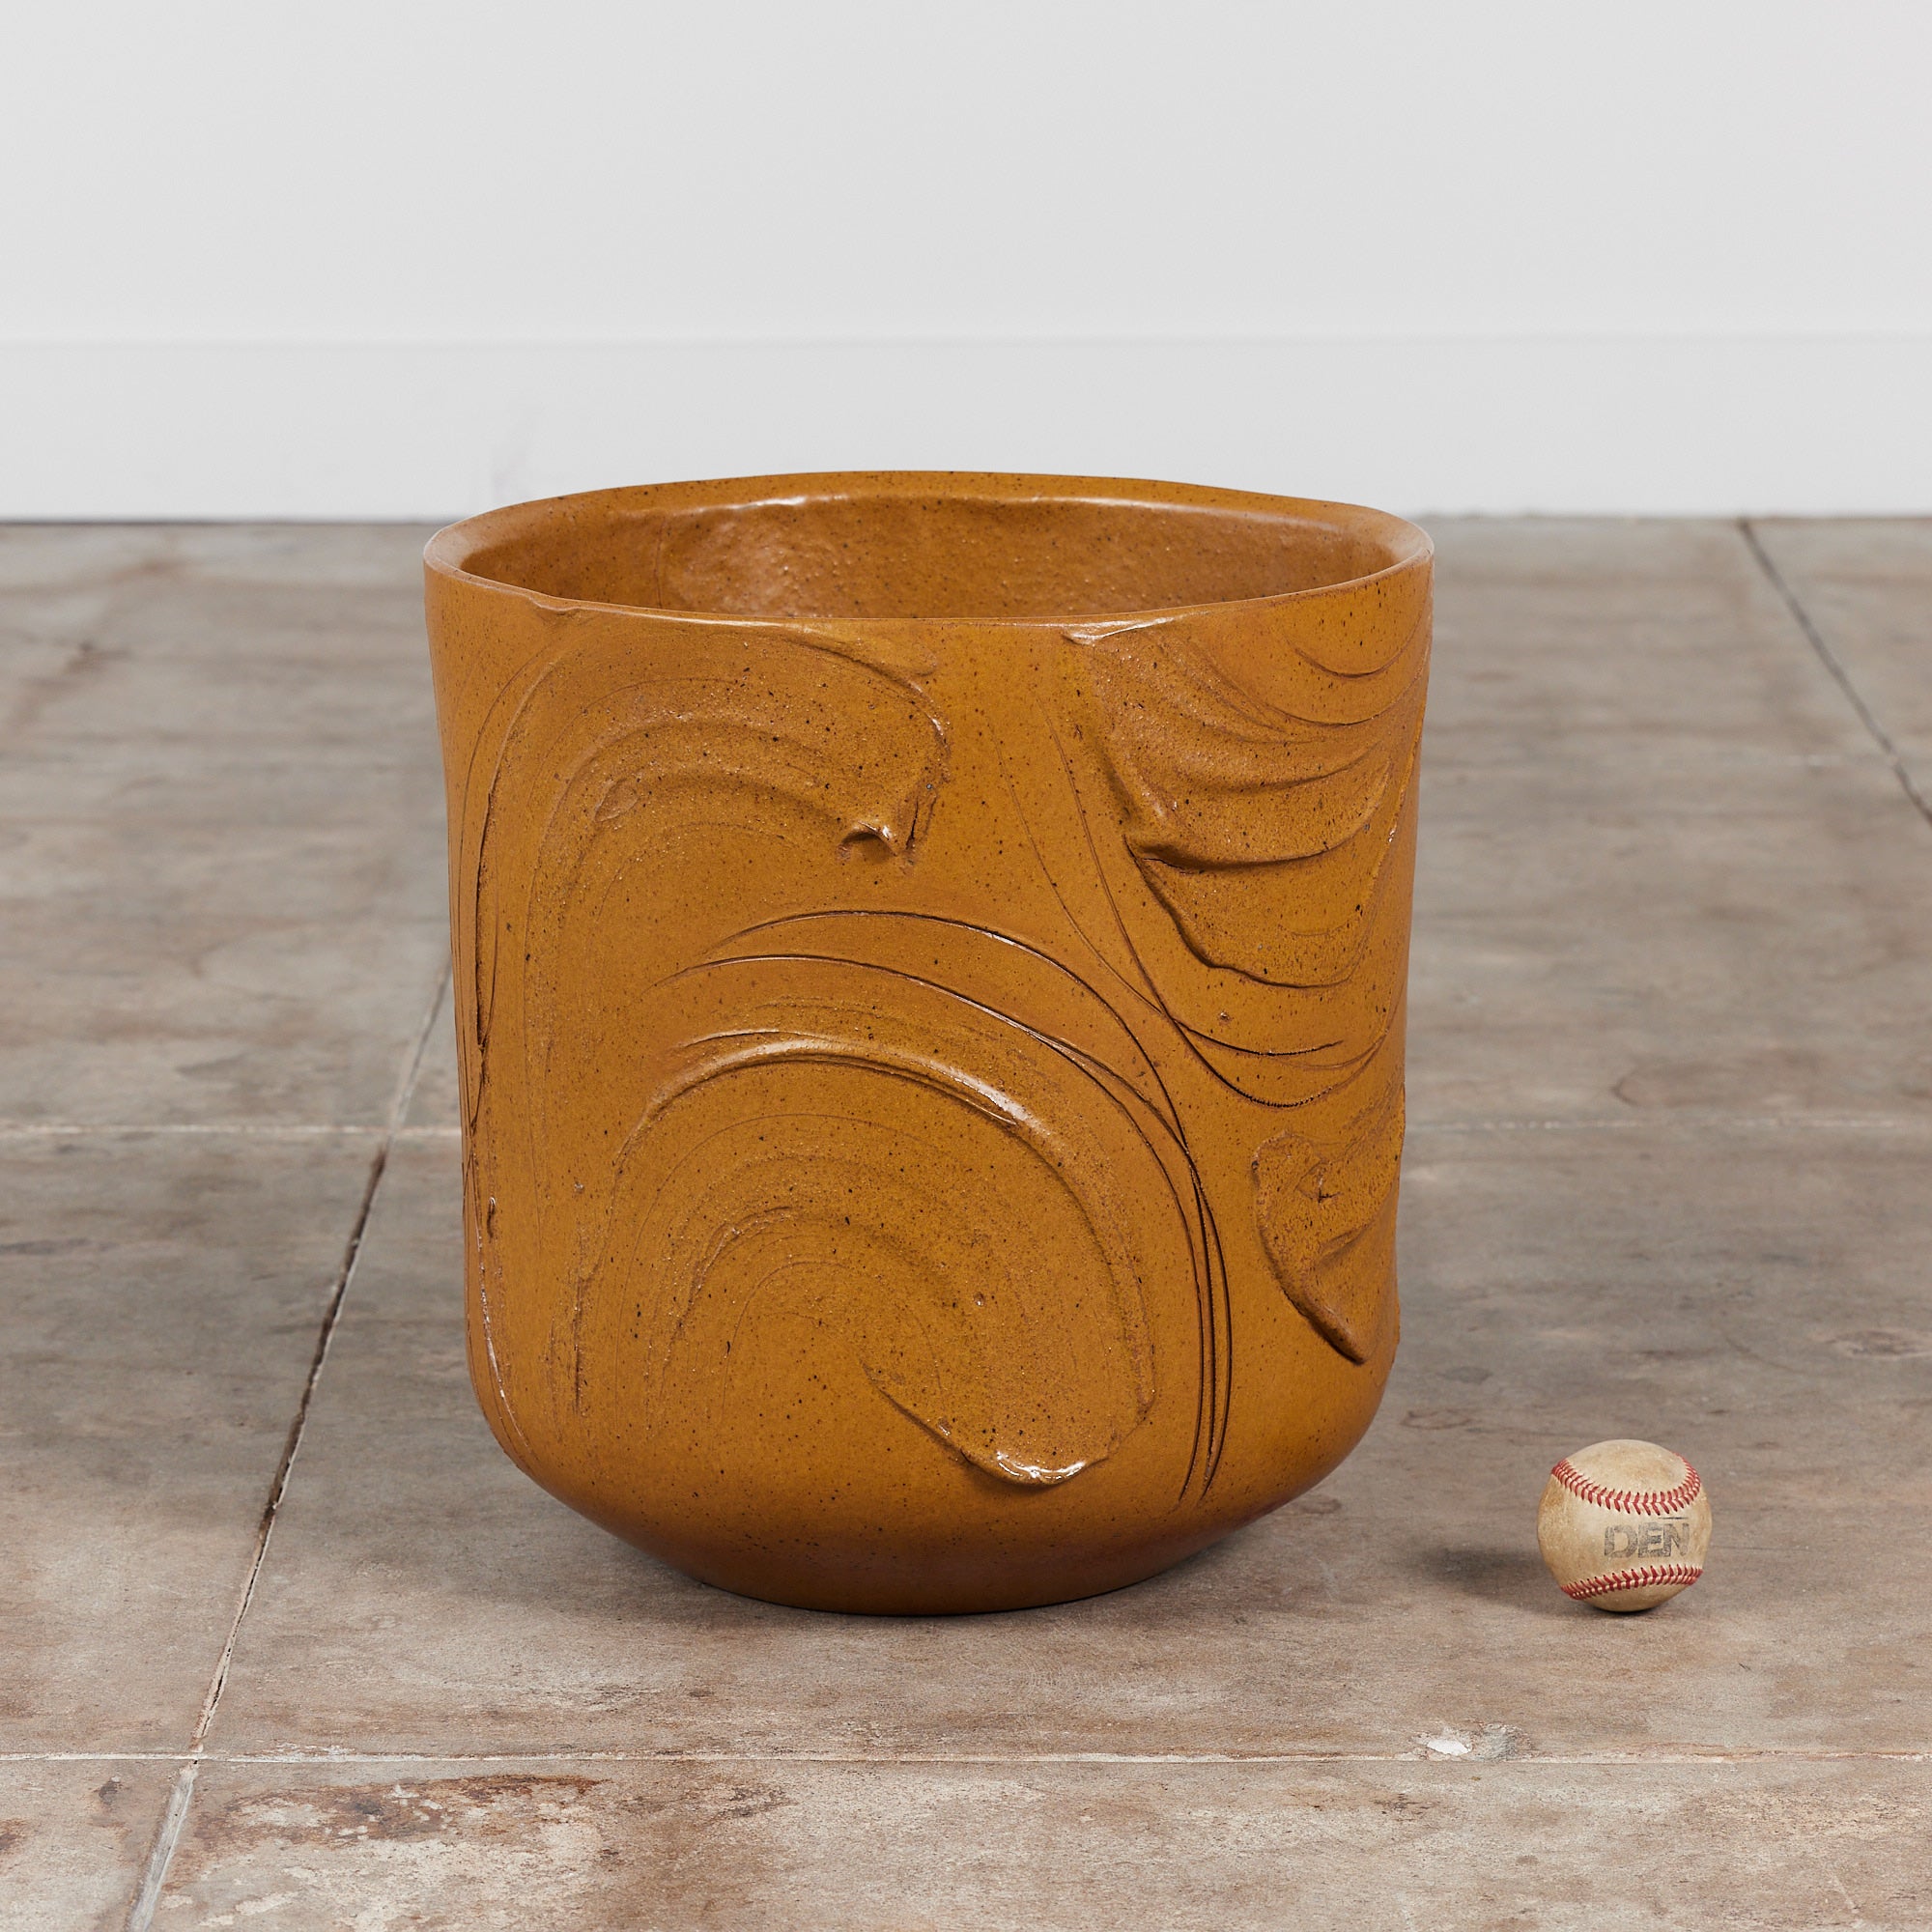 David Cressey "Expressive" Glazed Planter for Architectural Pottery